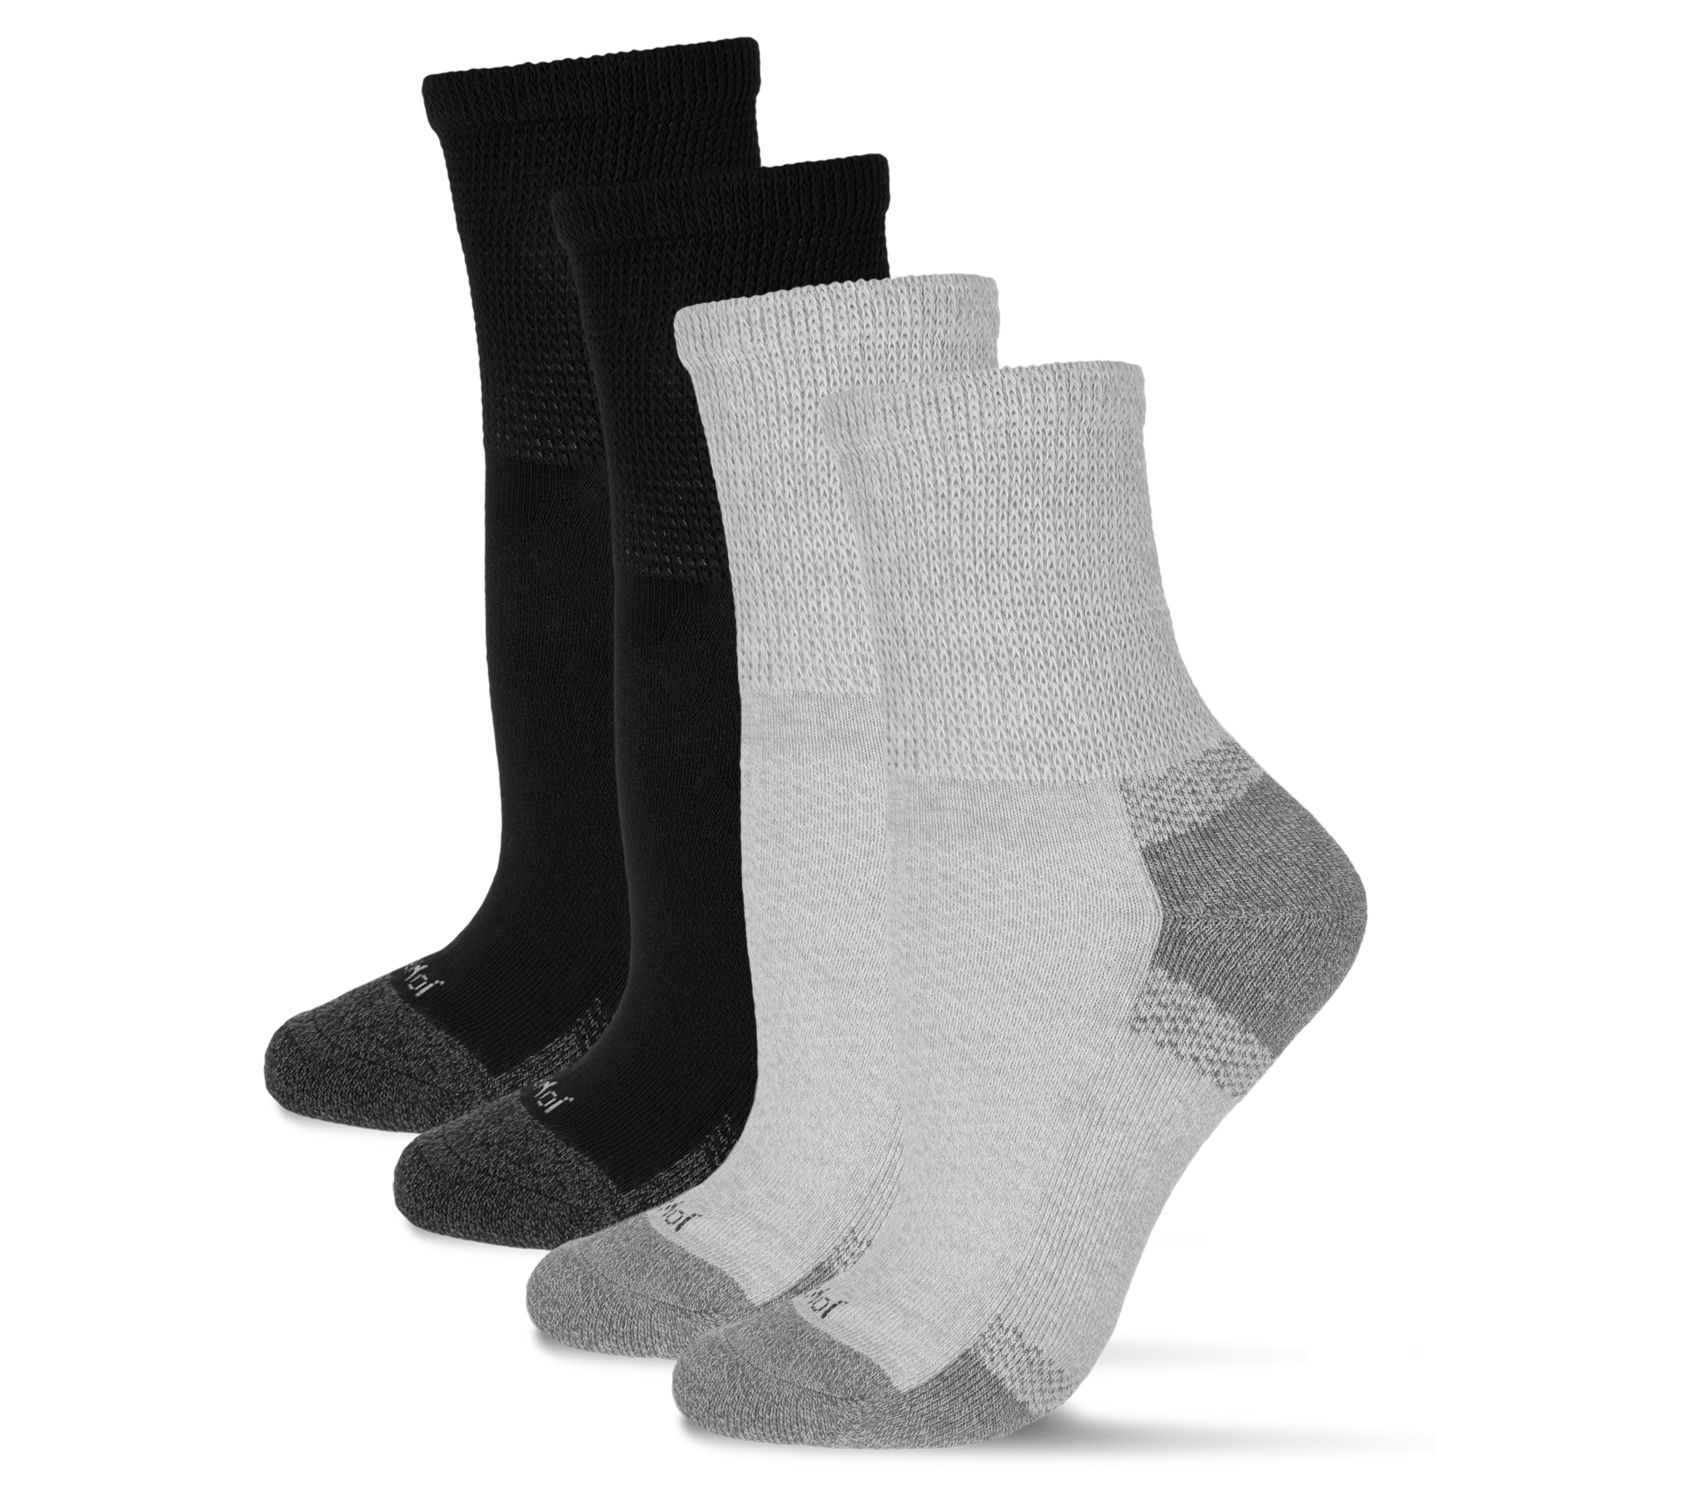 3 Pairs Womens Ankle Socks Low Cut Fit Crew Size 9-11 Sports Black Footies